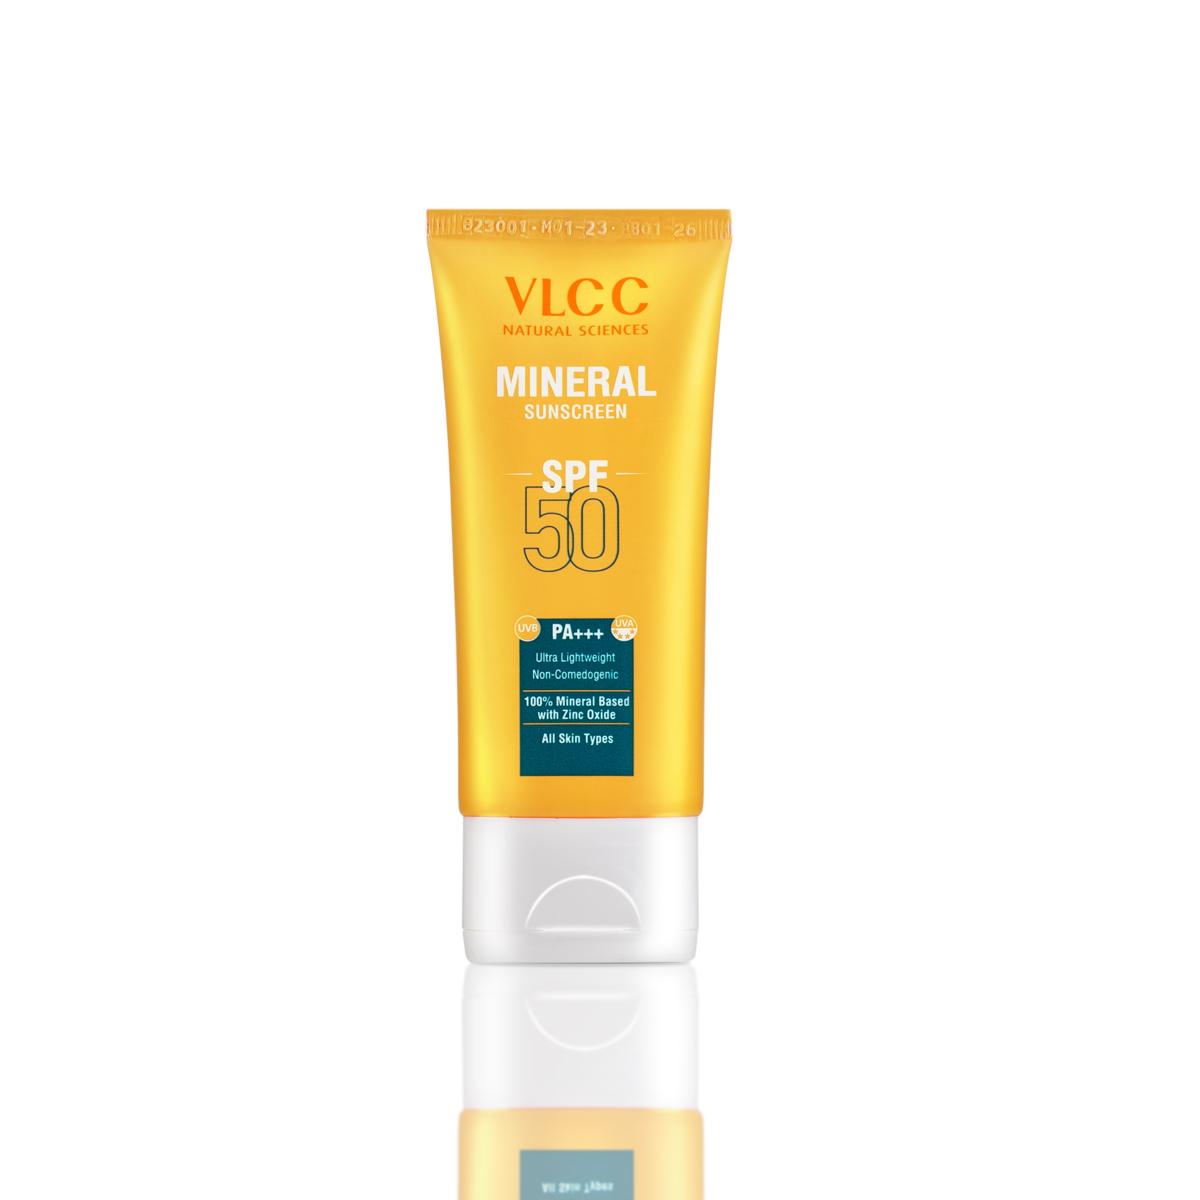 VLCC Mineral Sunscreen SPF 50 PA+++ - Ultra Lightweight and Non-Comedogenic Sun Protection